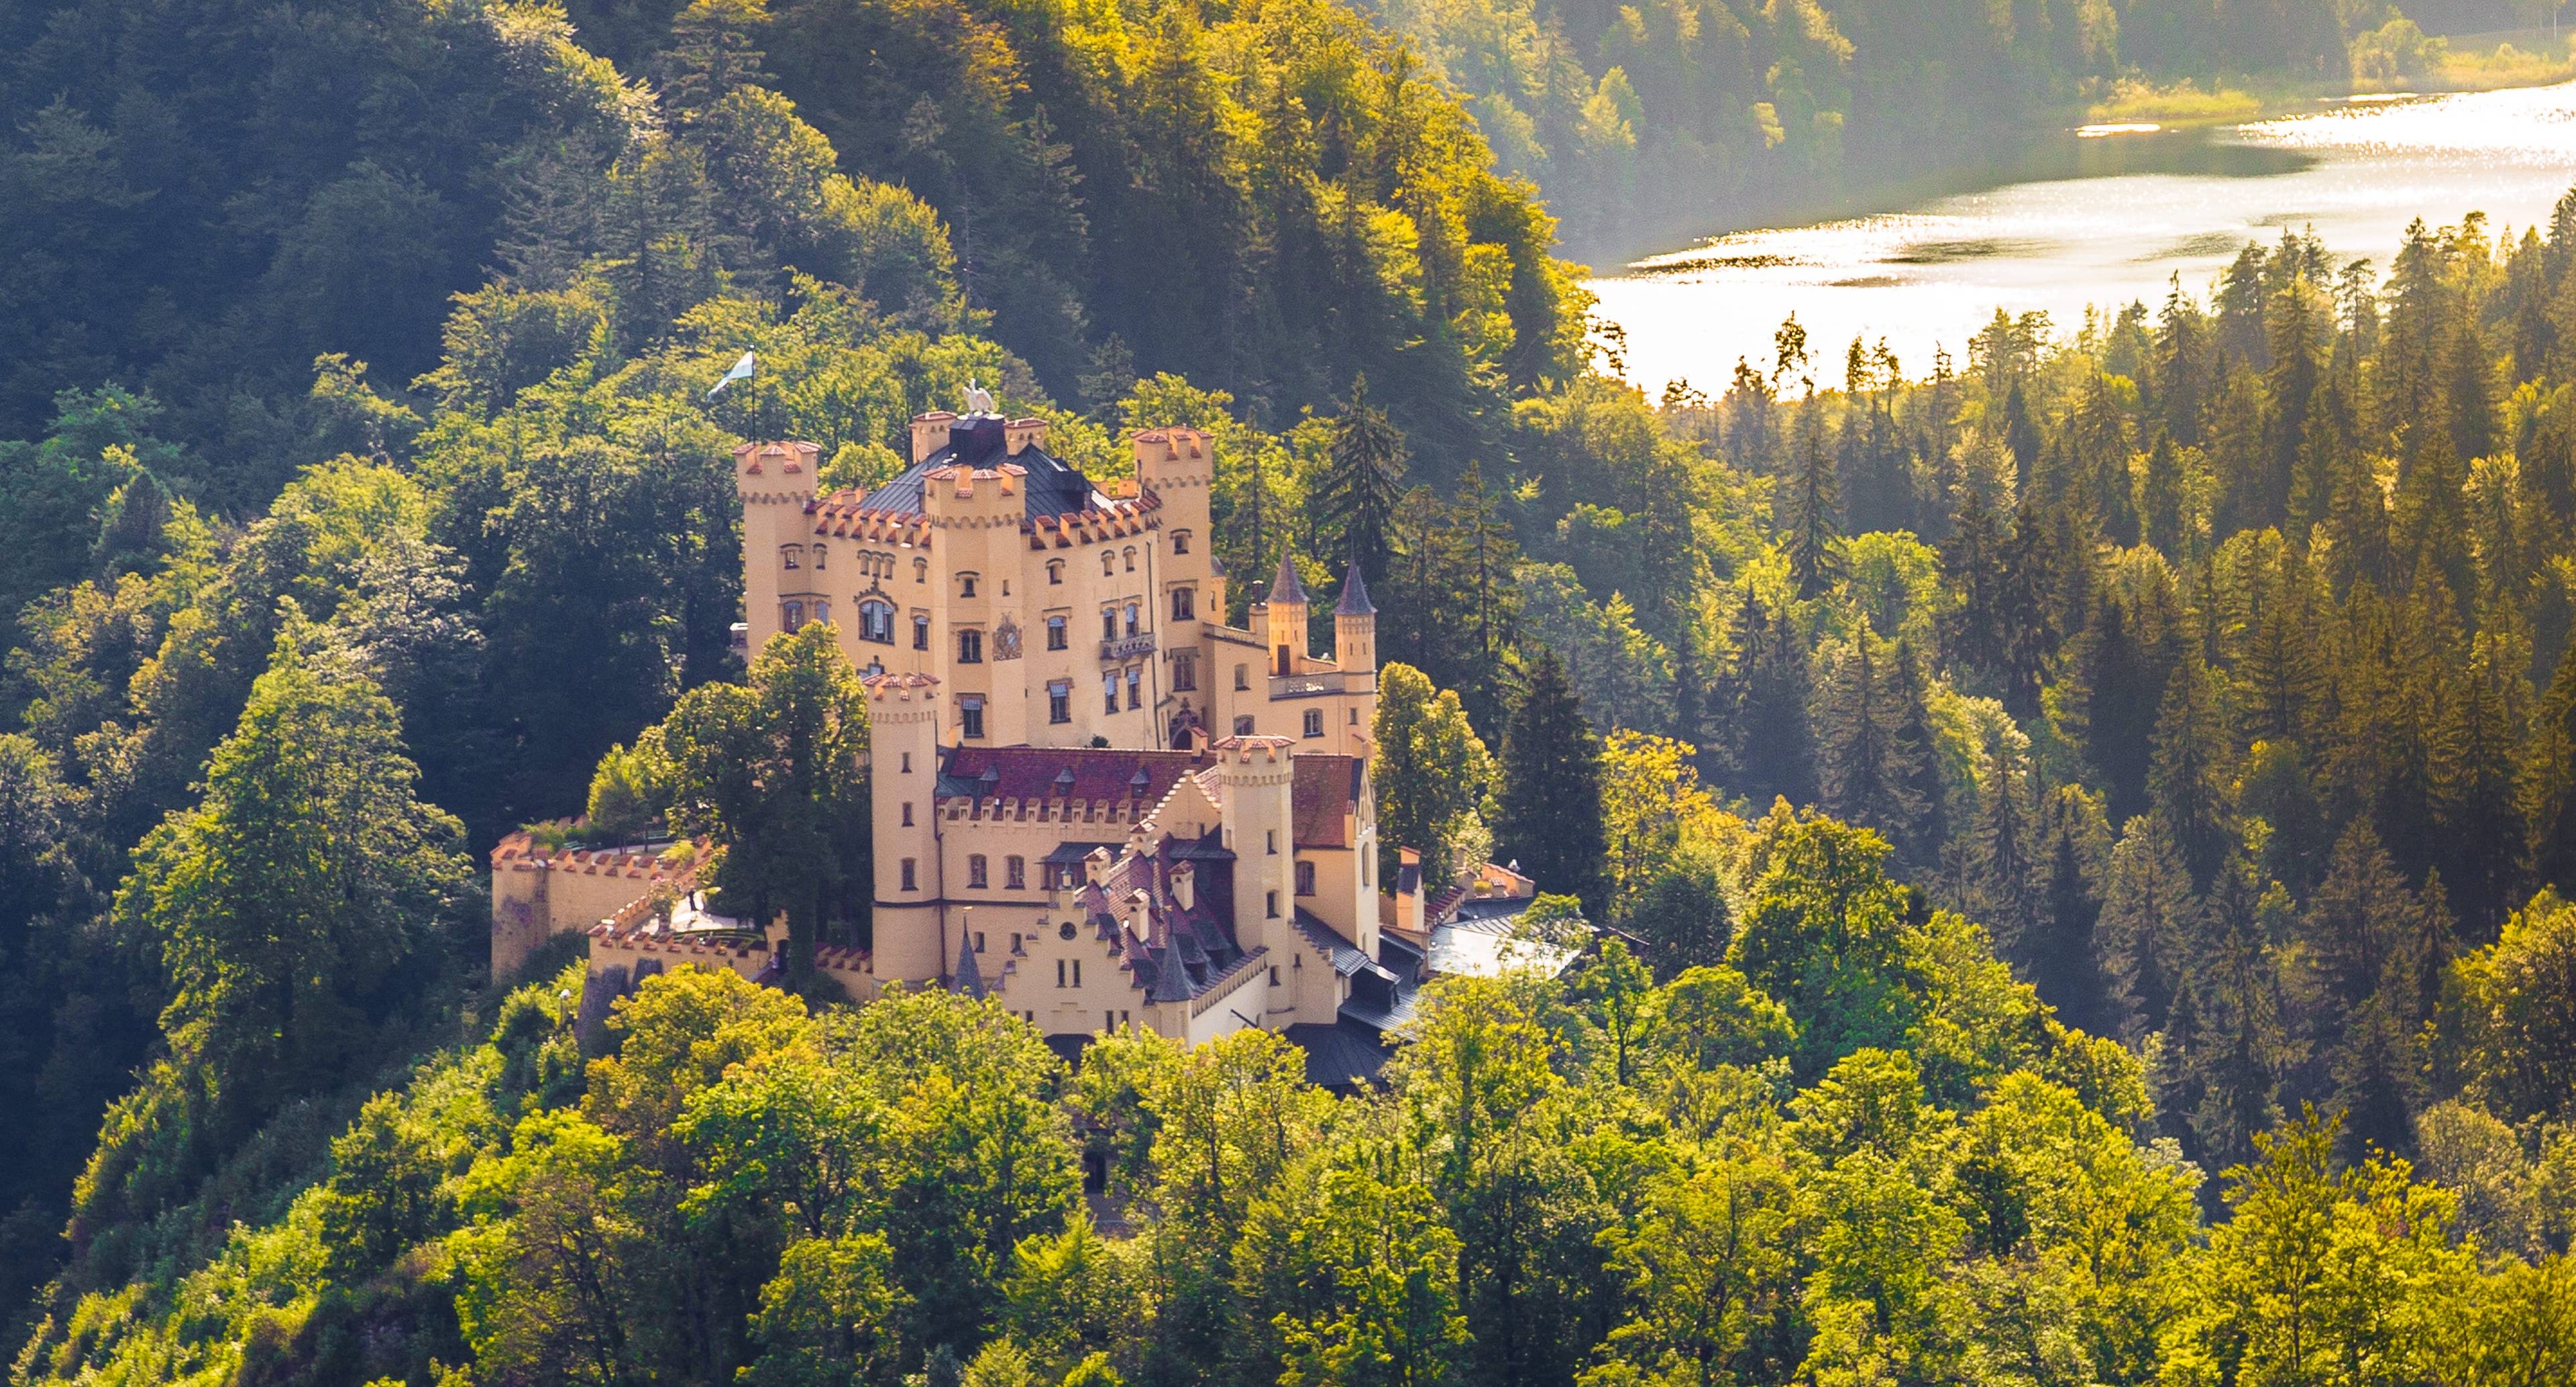 Enchanting Castles and Villages Surrounded by the Alps